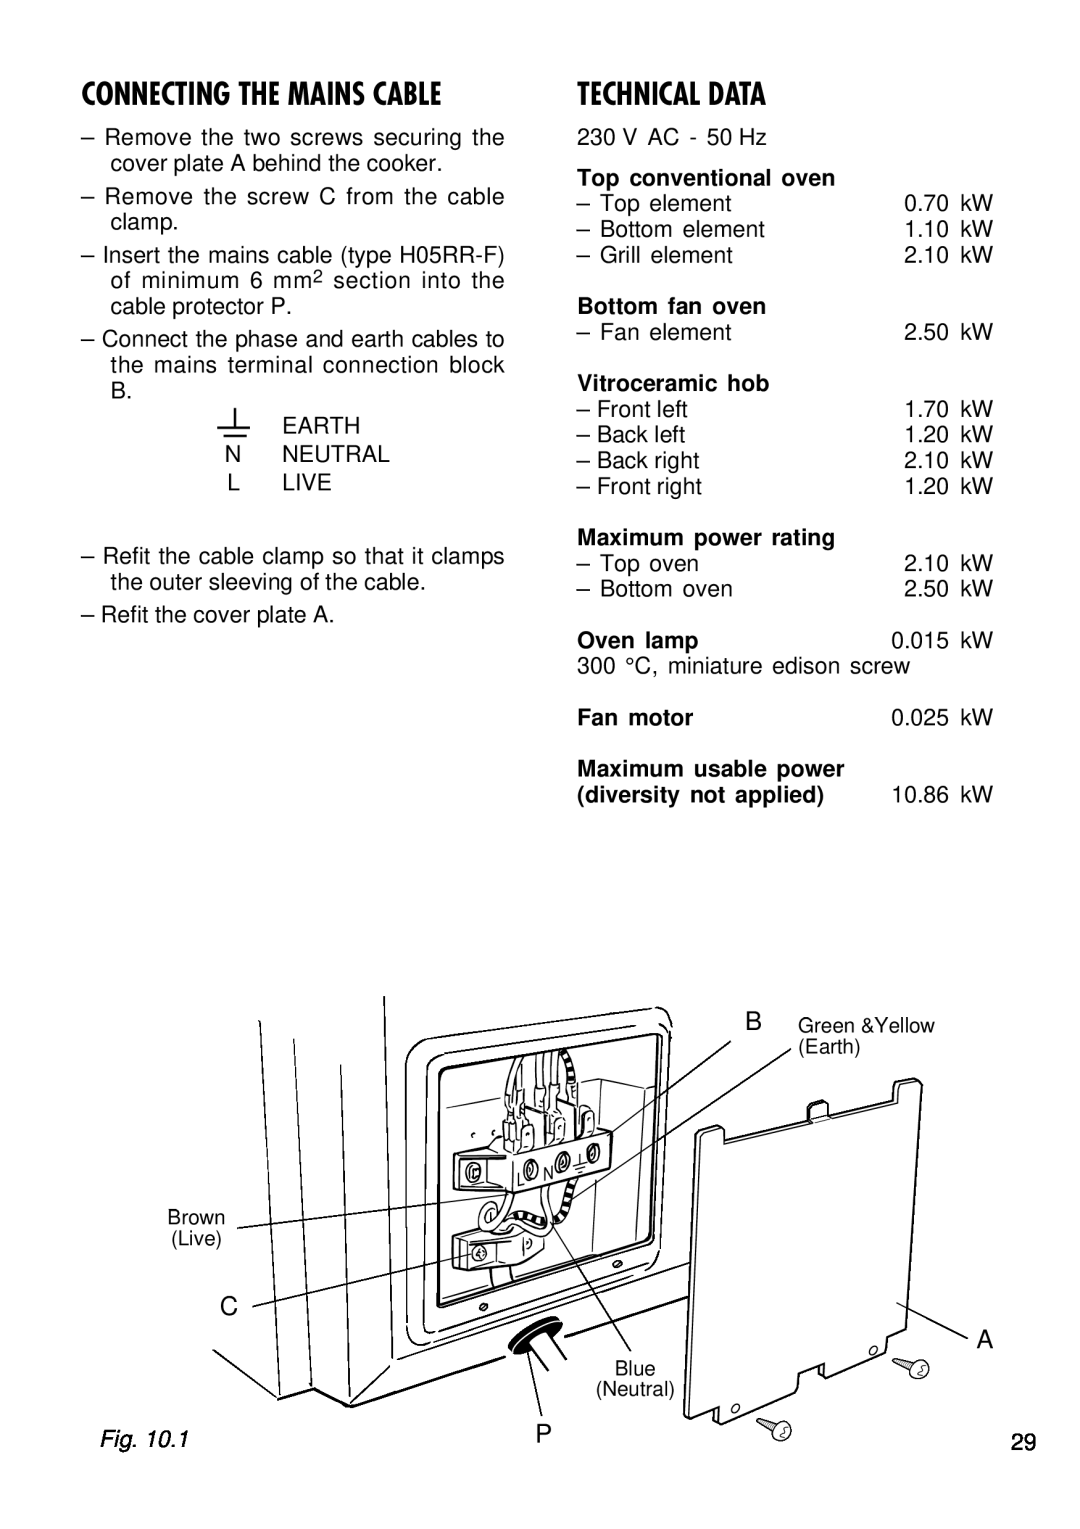 Kenwood CK 280 manual Technical Data, Connecting The Mains Cable 